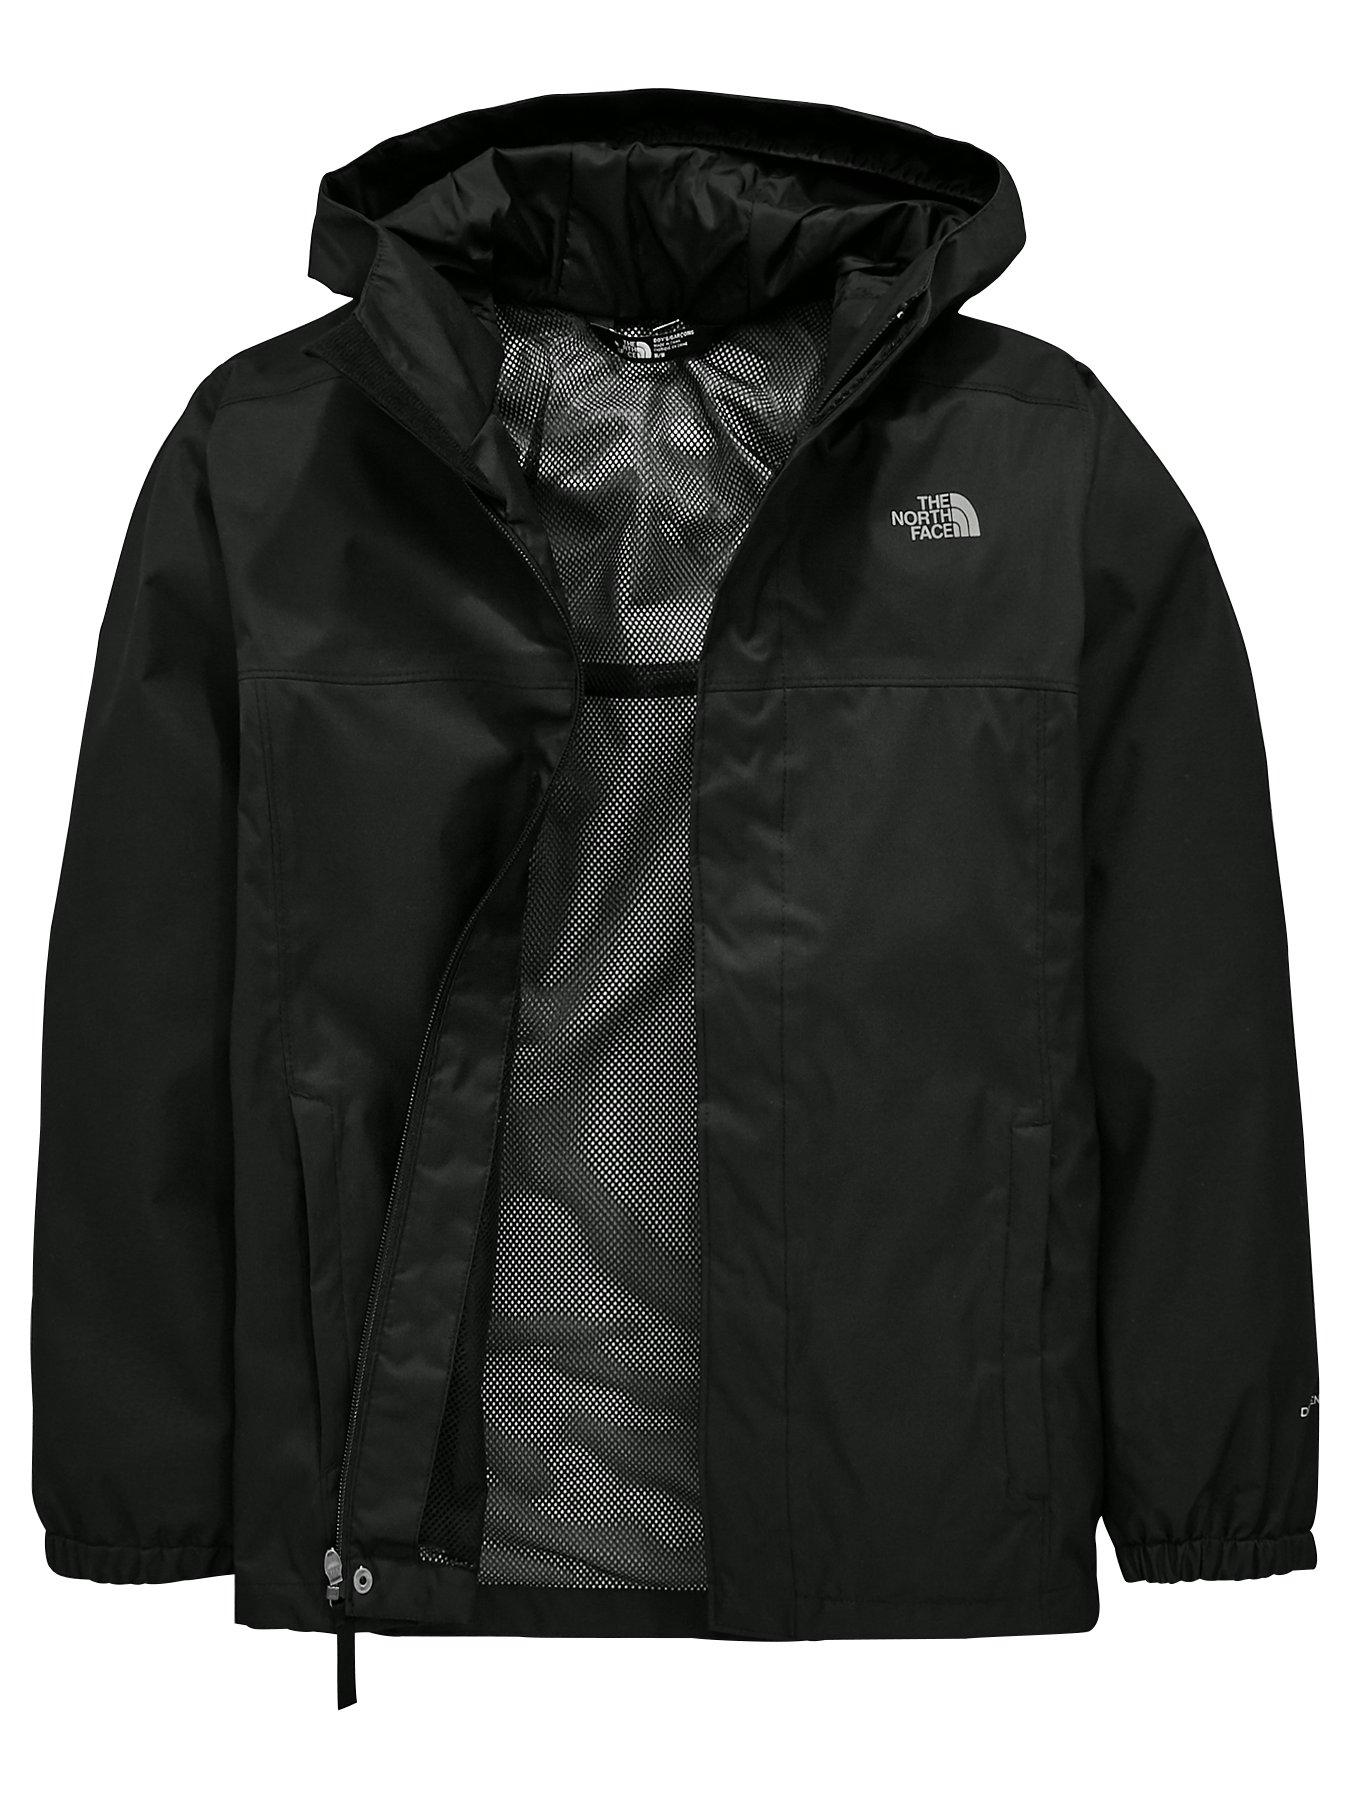 north face baby uk